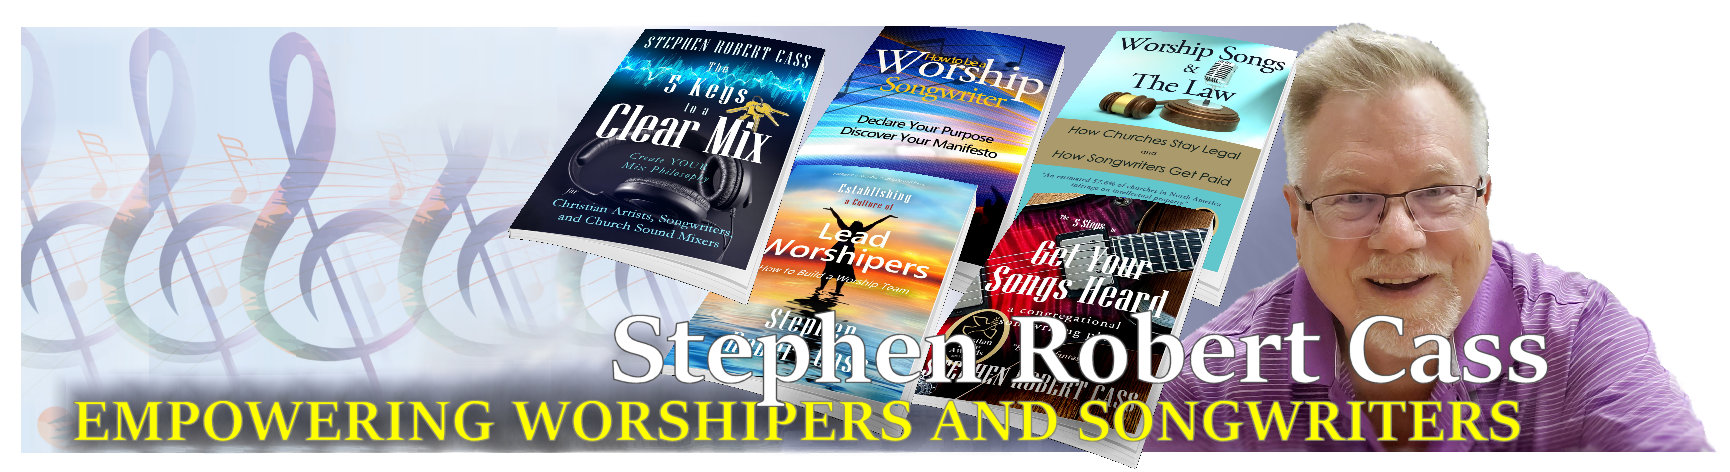 Join the Empowering Worshipers and Songwriters newsletter